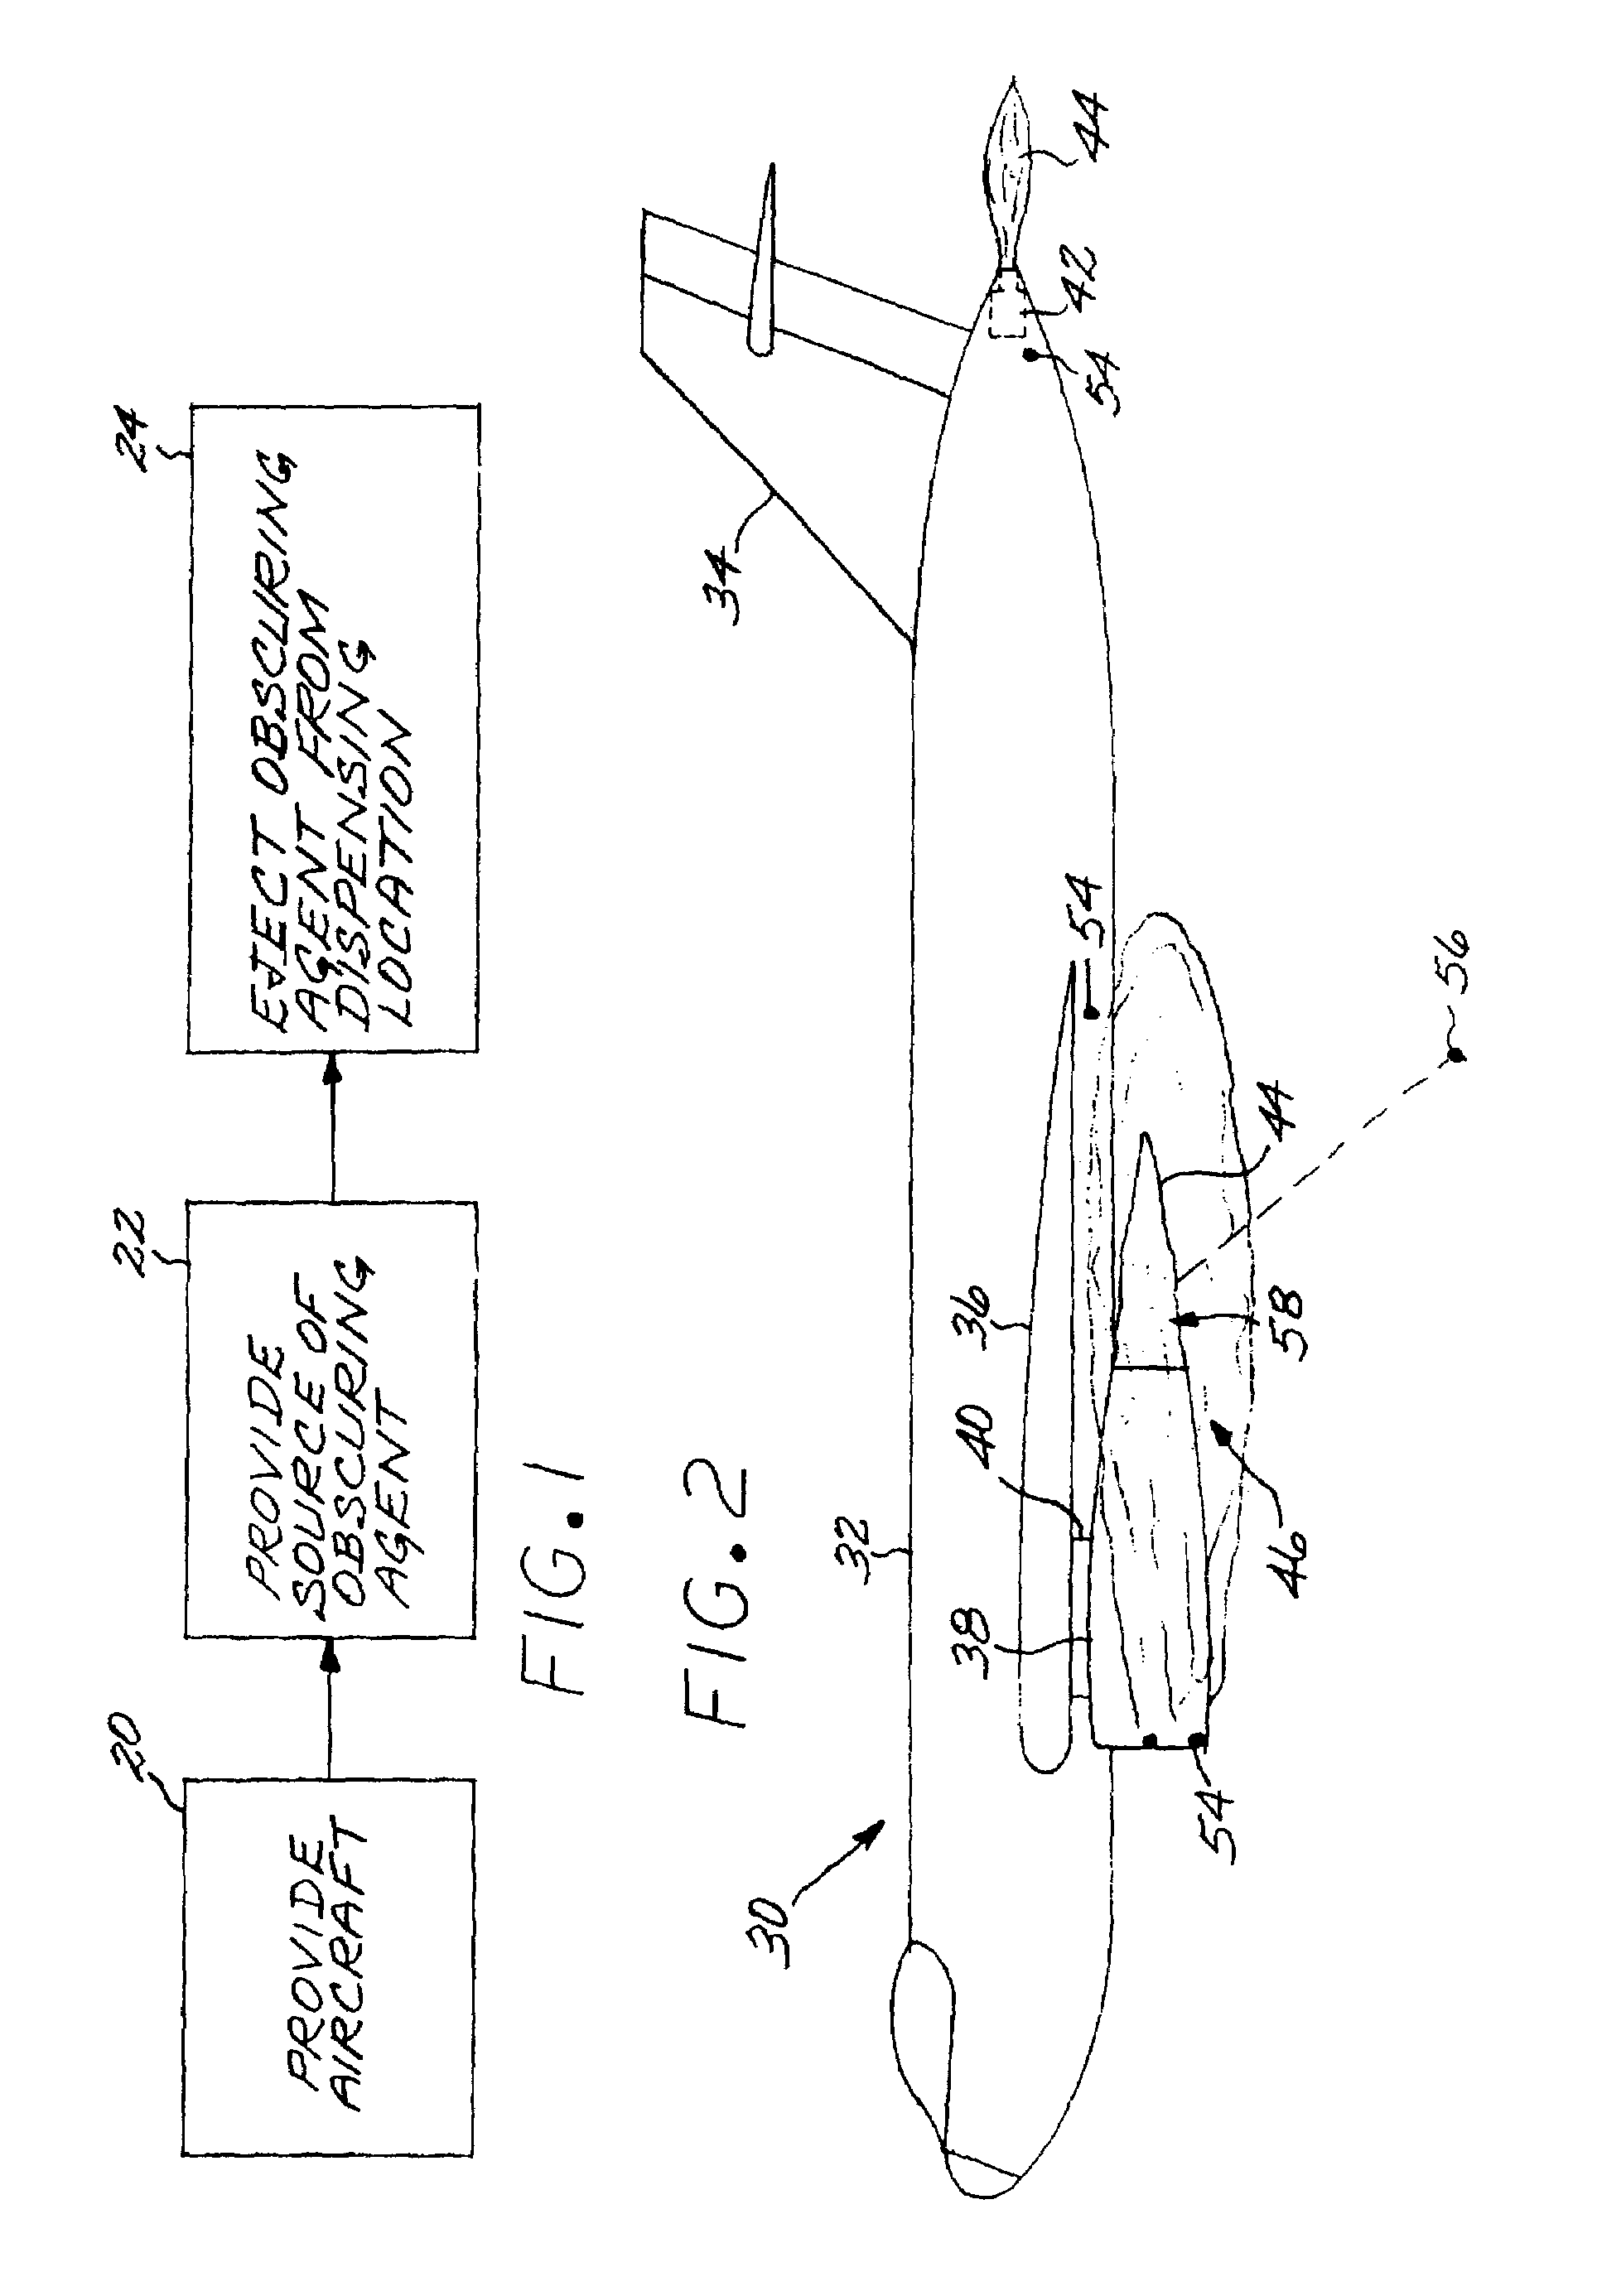 Obscuration method for reducing the infrared signature of an object